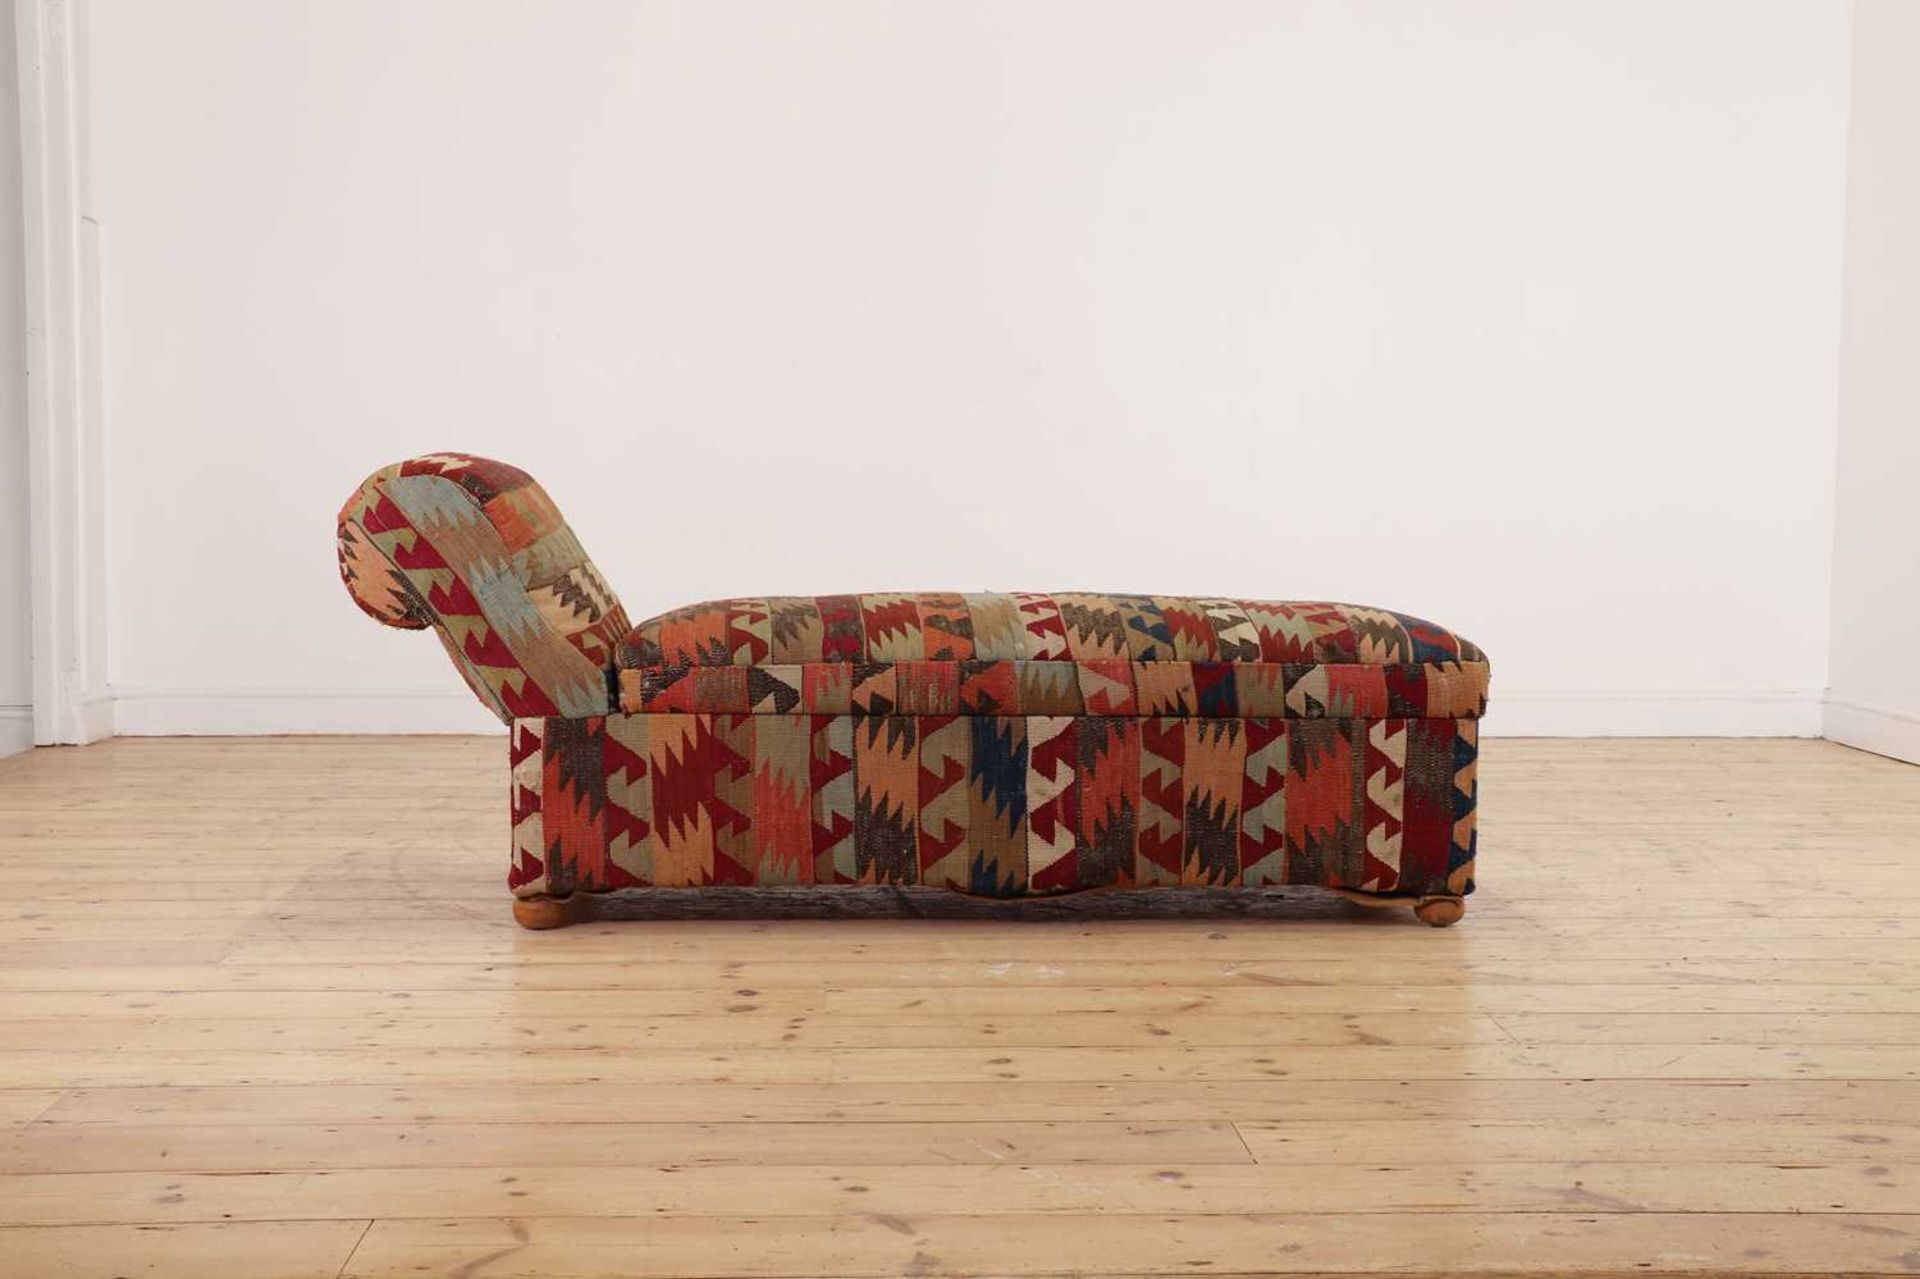 A kilim-upholstered Ottoman daybed - Image 4 of 8